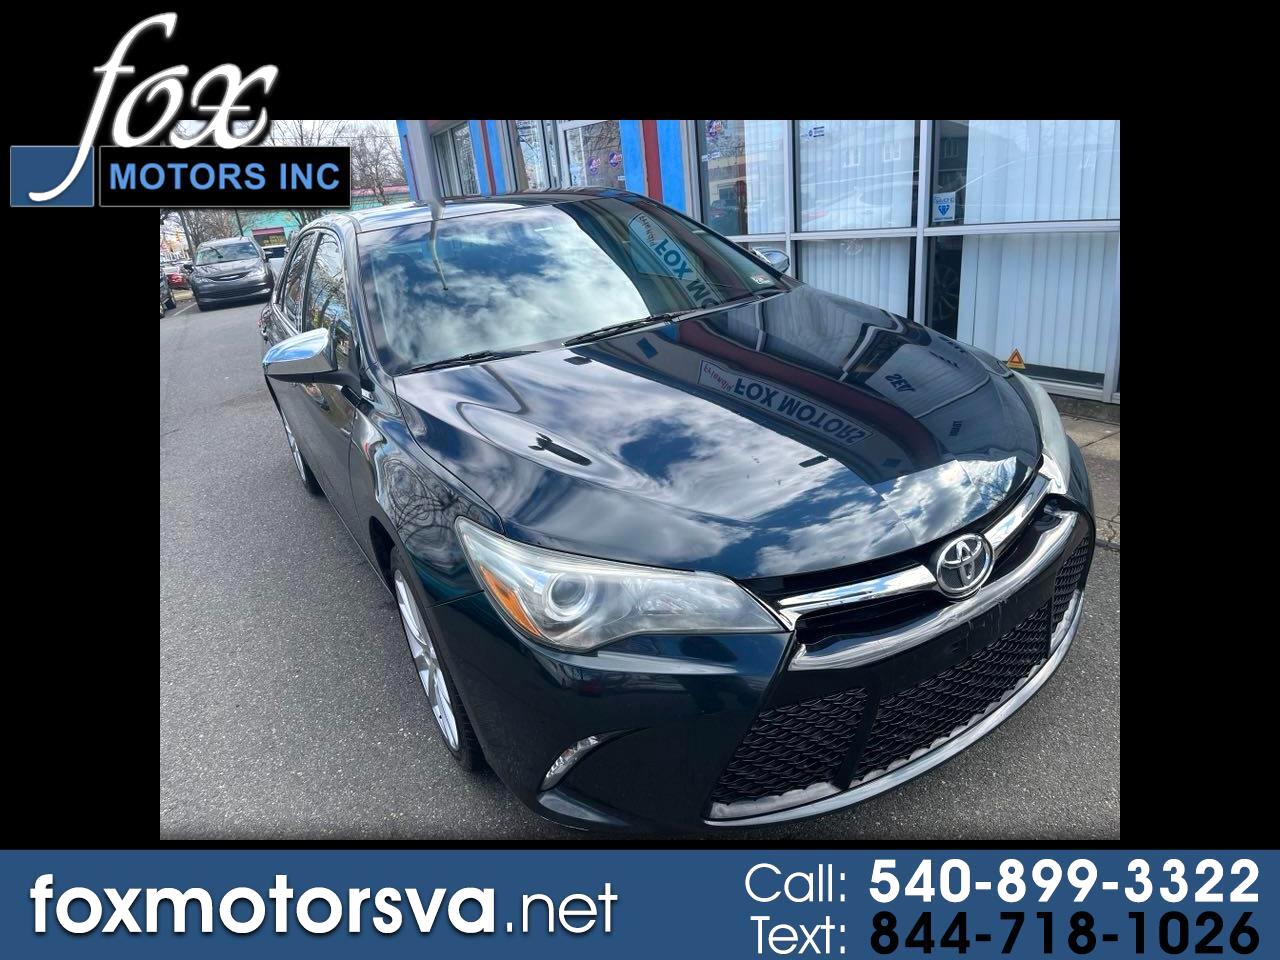 Toyota Camry 4dr Sdn I4 Auto XLE (Natl) 2015